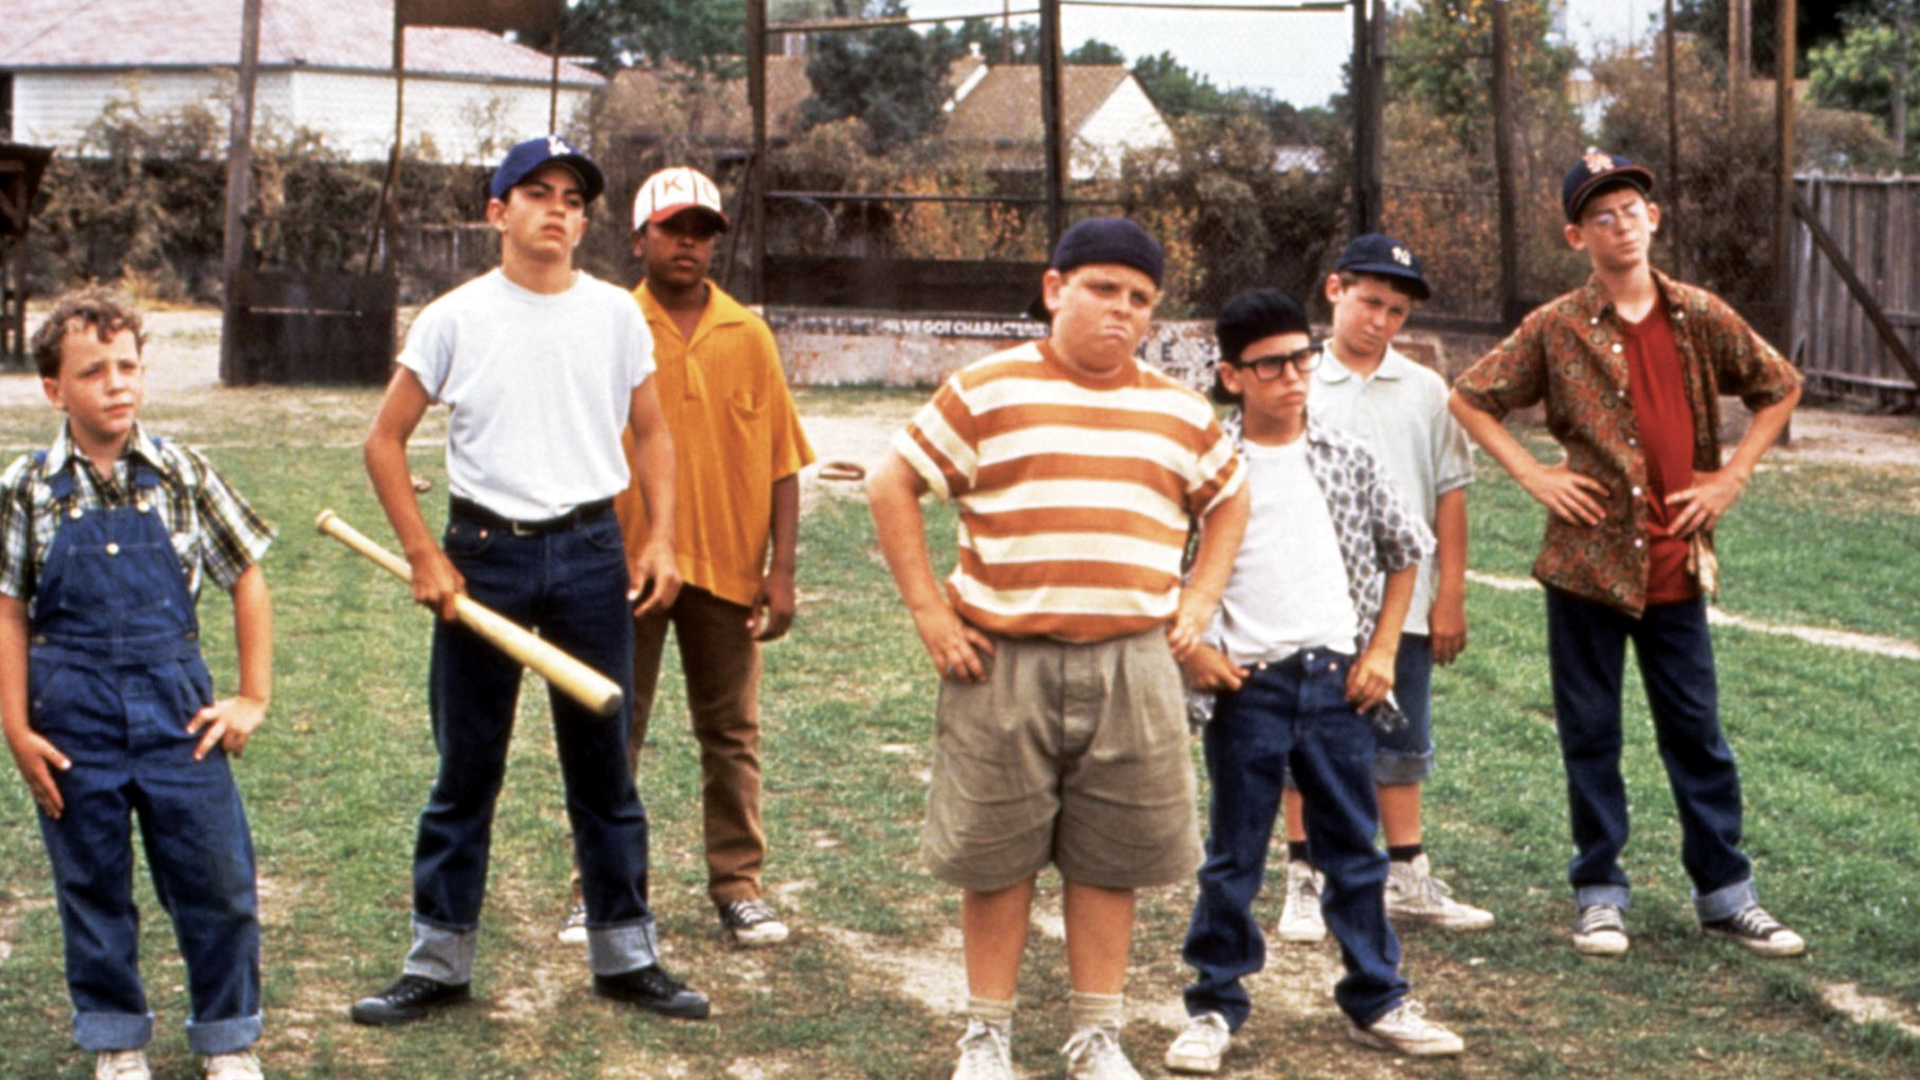 The Sandlot vs. Stand By Me